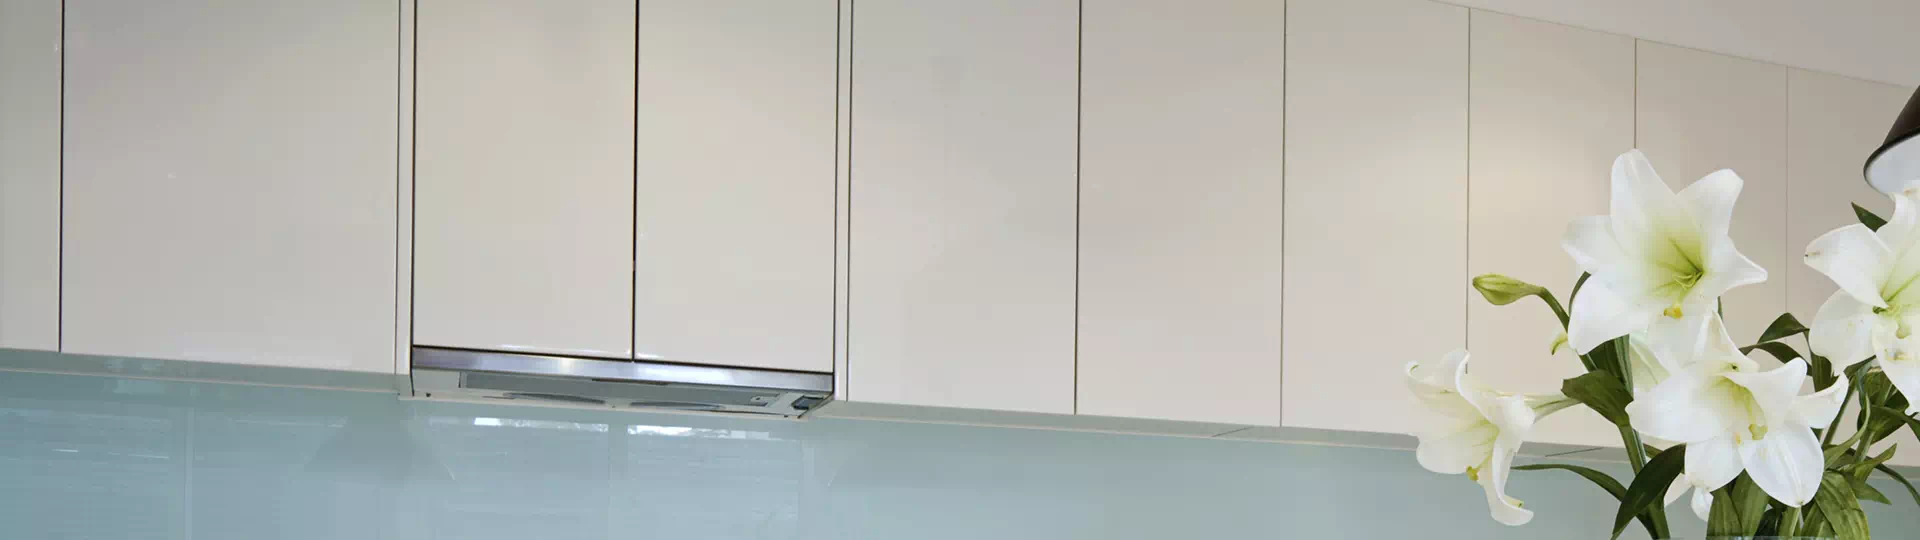 How To Clean Laminate Cabinets Simple, How To Clean White Formica Kitchen Cabinets